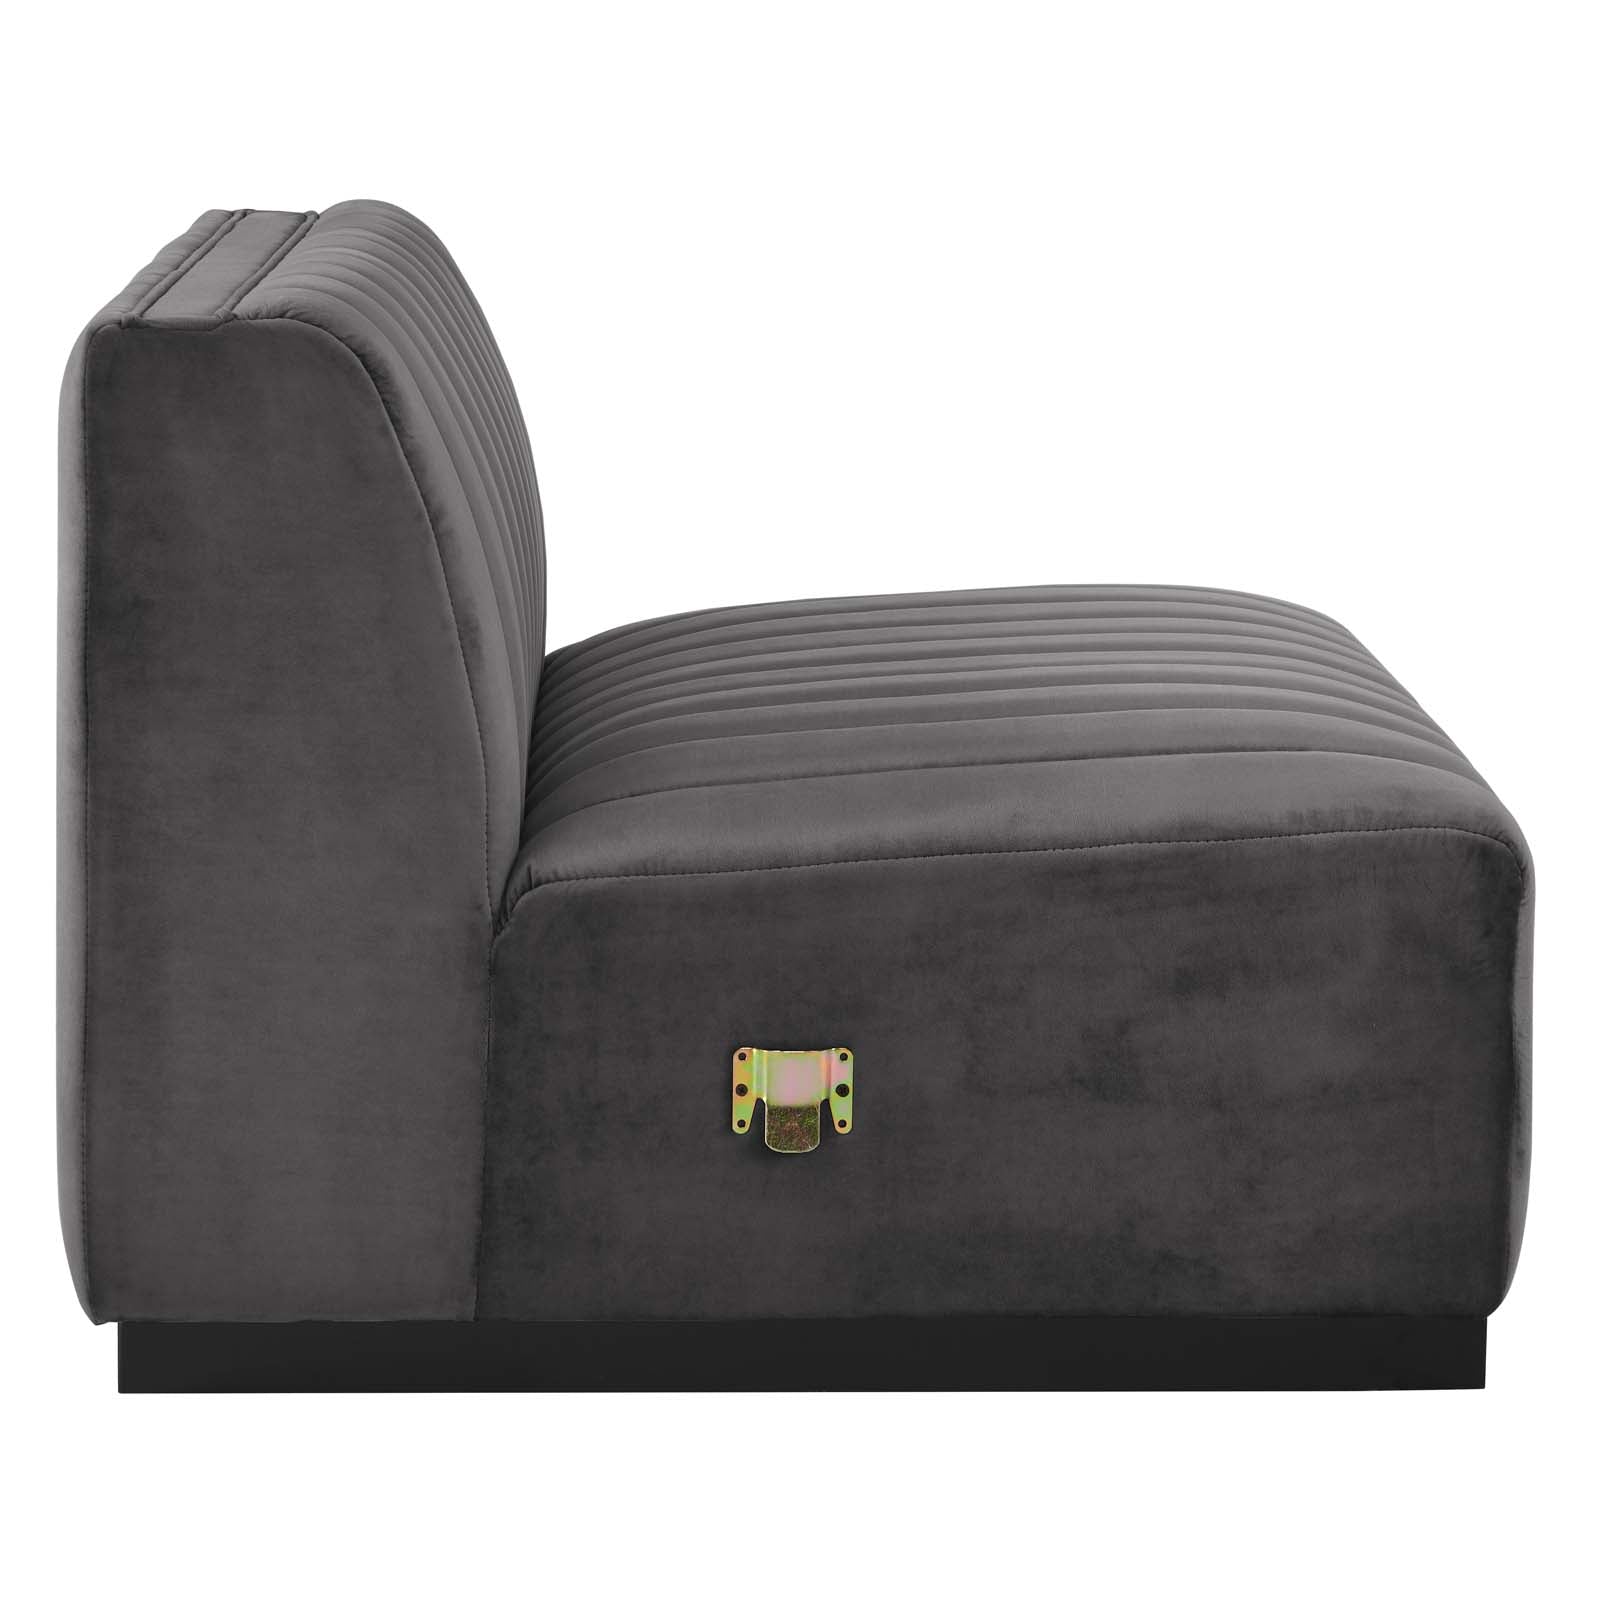 Modway Accent Chairs - Conjure Channel Tufted Performance Velvet Armless Chair Black Gray